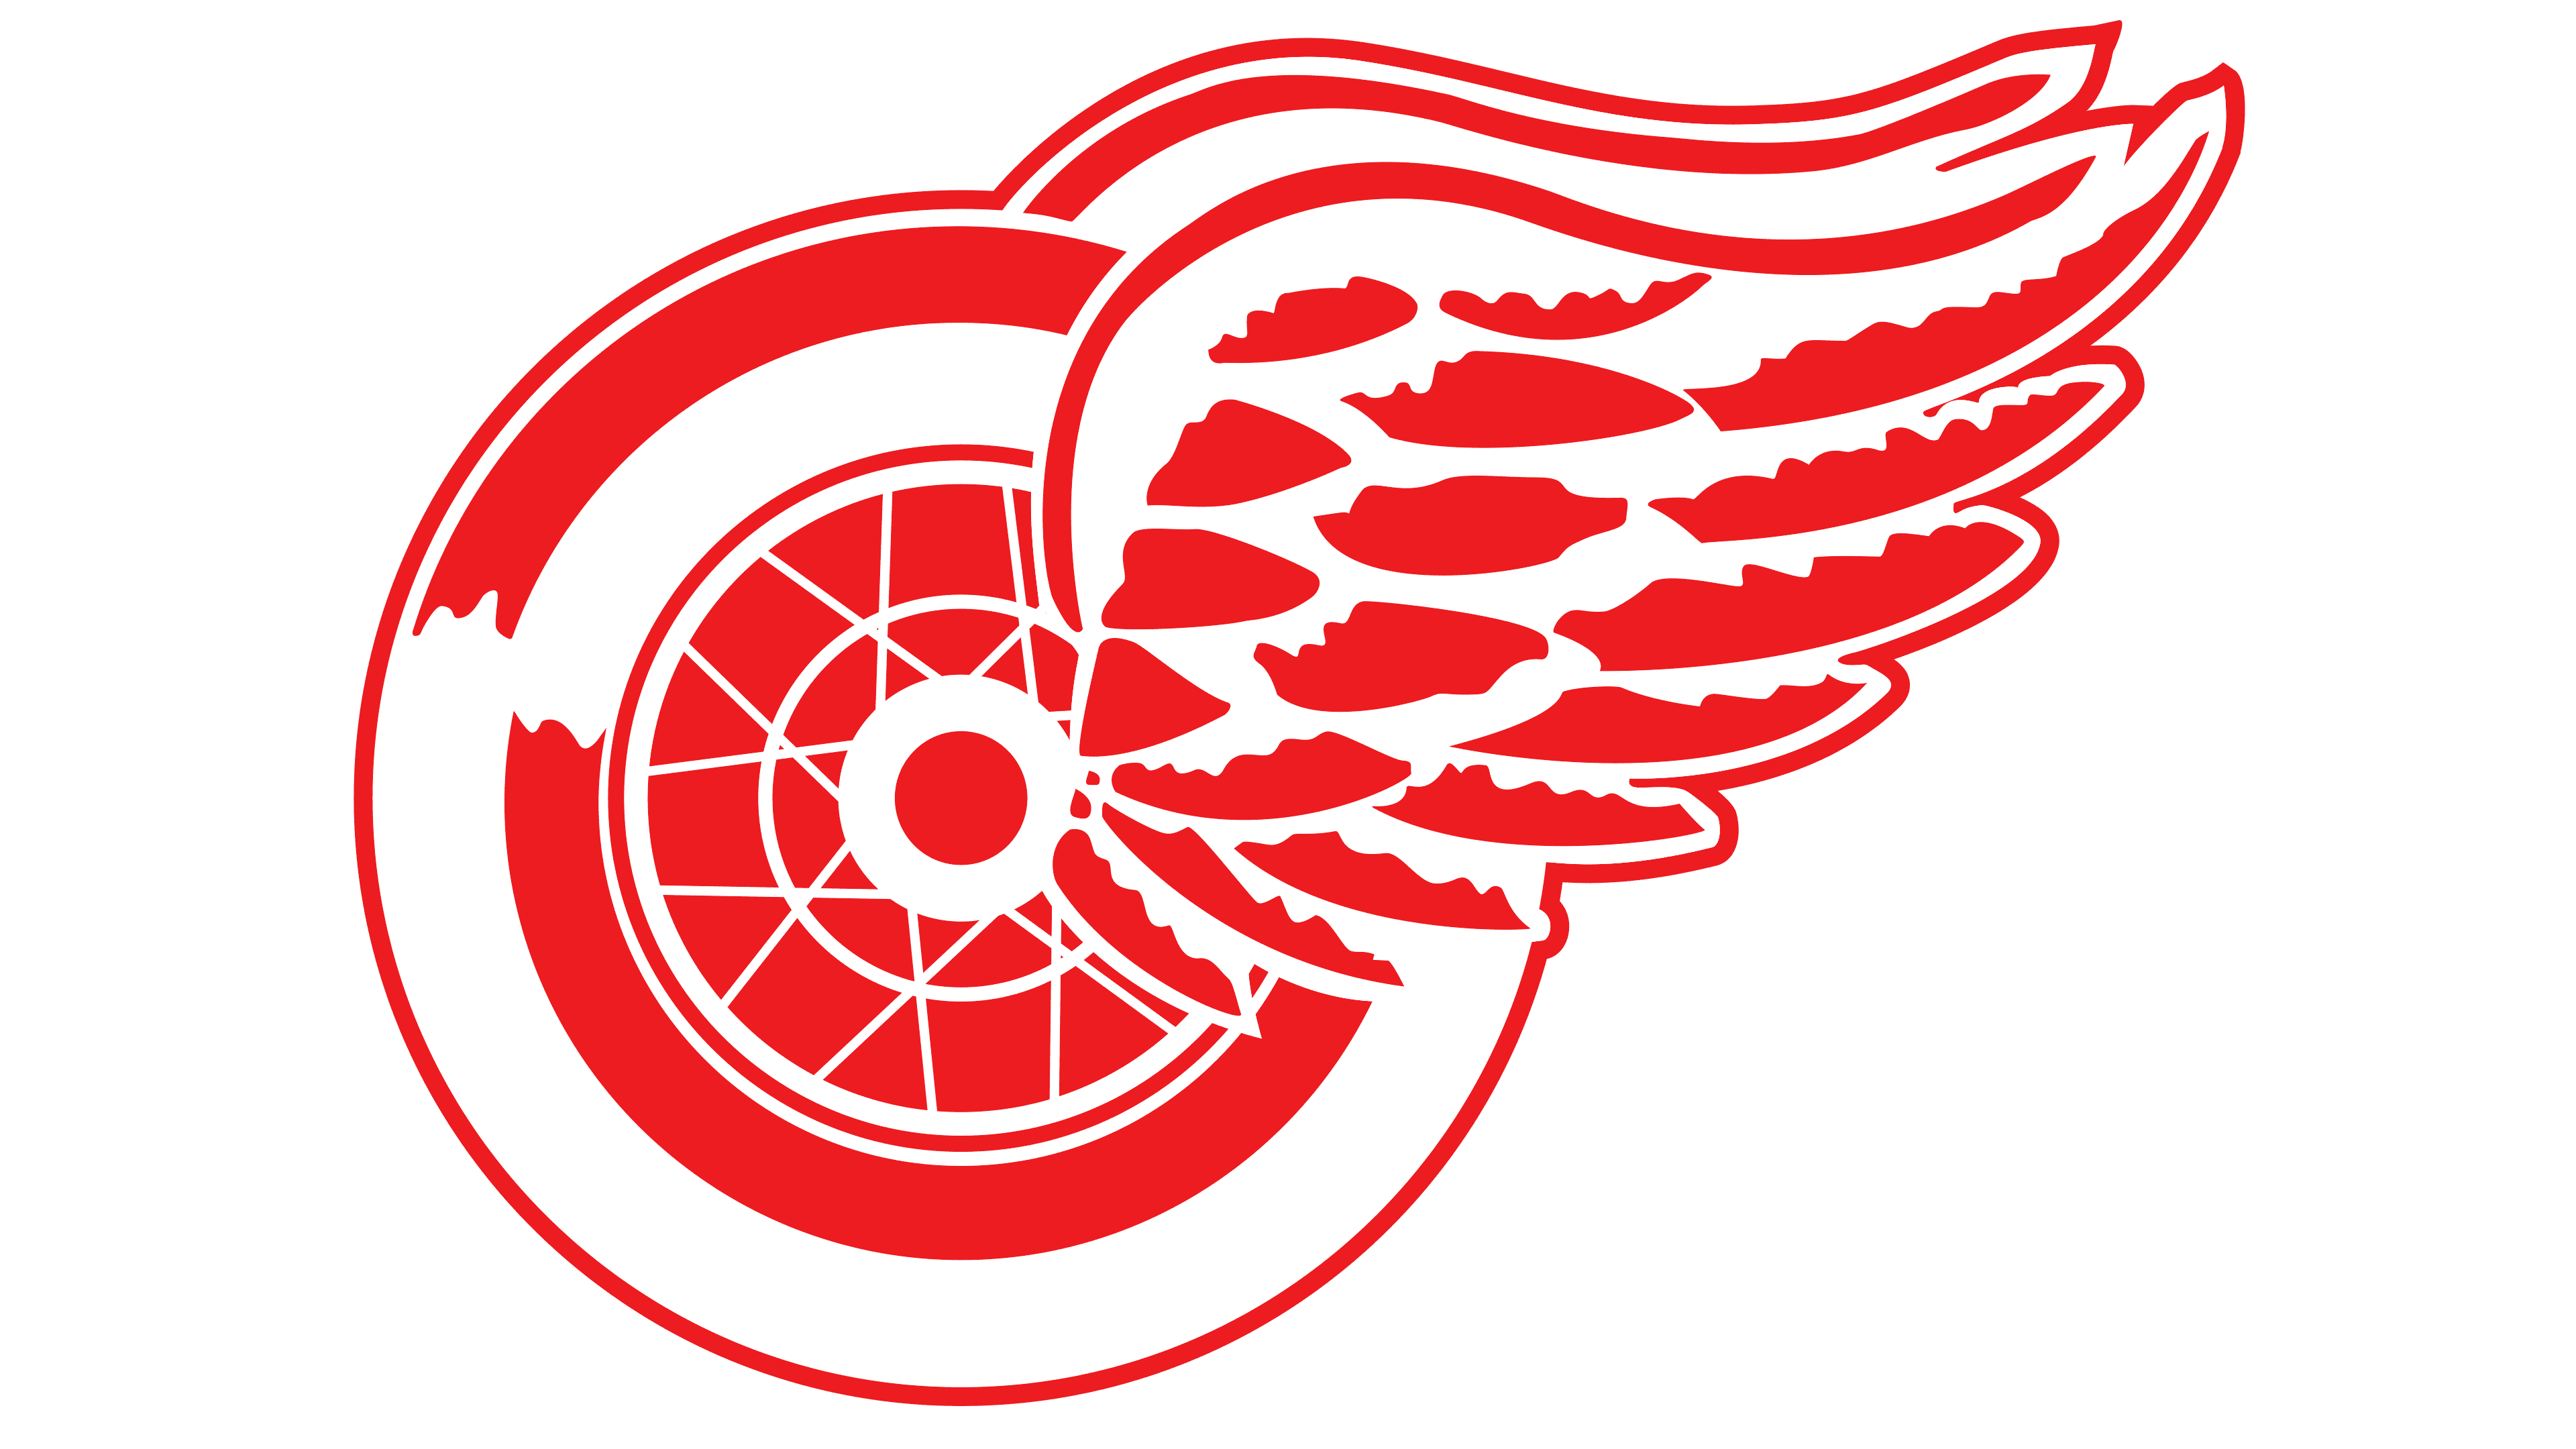 Detroit Red Wings Logo, symbol, meaning, history, PNG, brand